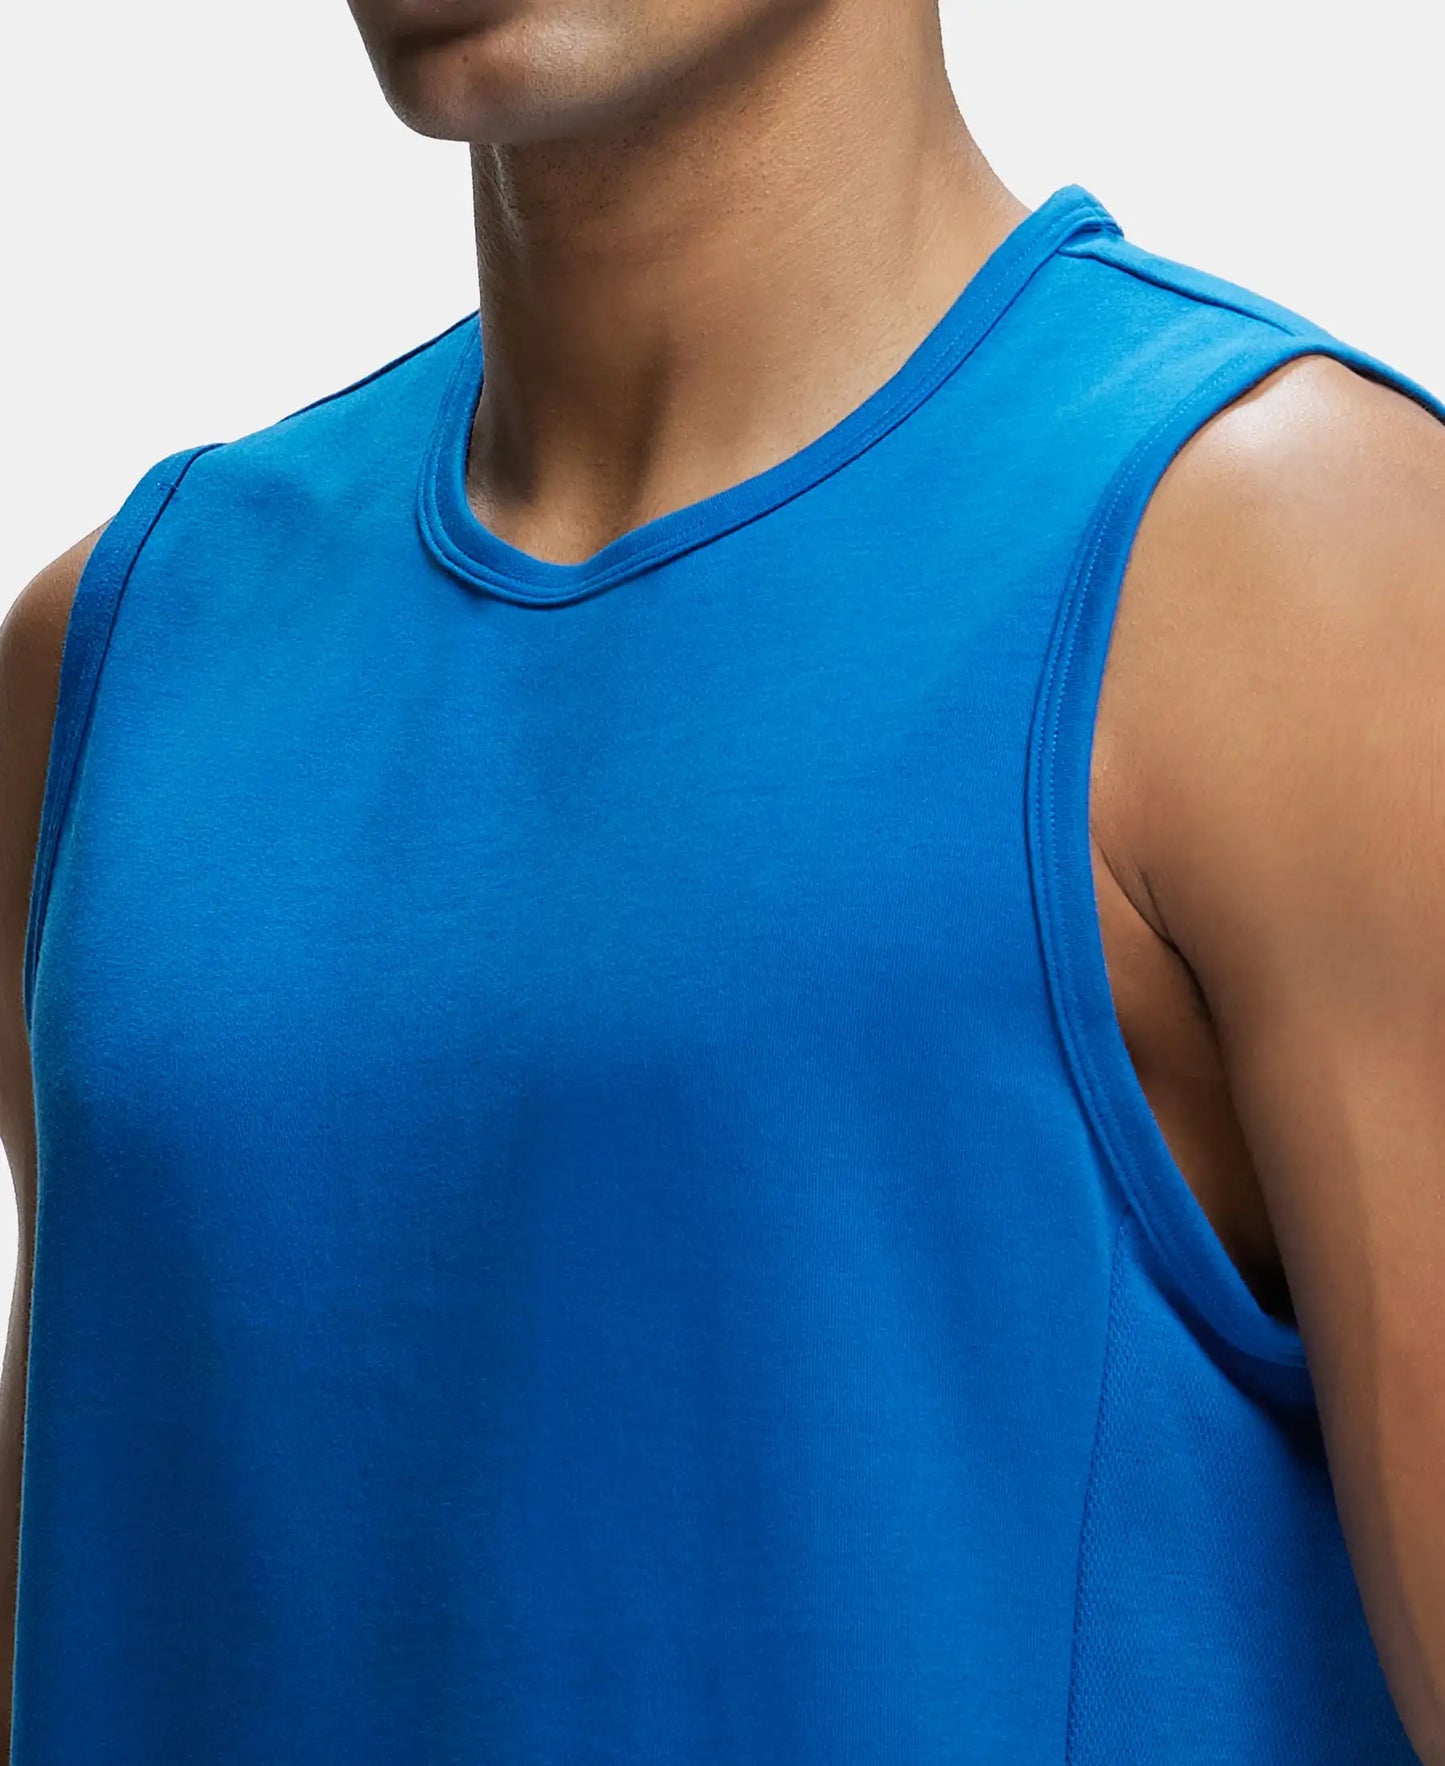 Super Combed Cotton Blend Round Neck Muscle Tee with Breathable Mesh - Move Blue-6